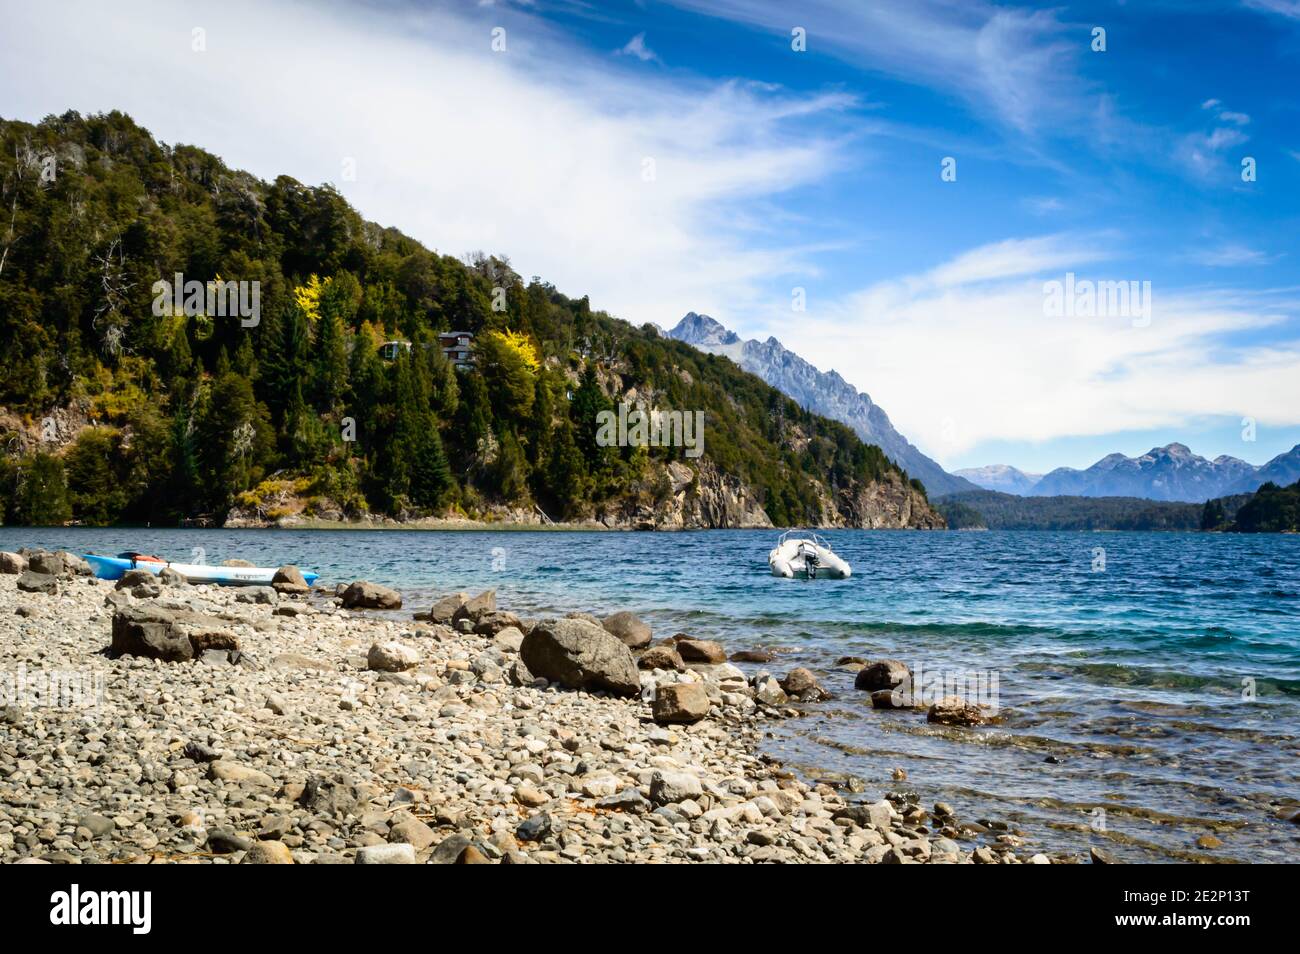 Lake shore with rocks, mountains and pine trees. A motorboat floating near a buoy. Summer in Bariloche. Stock Photo